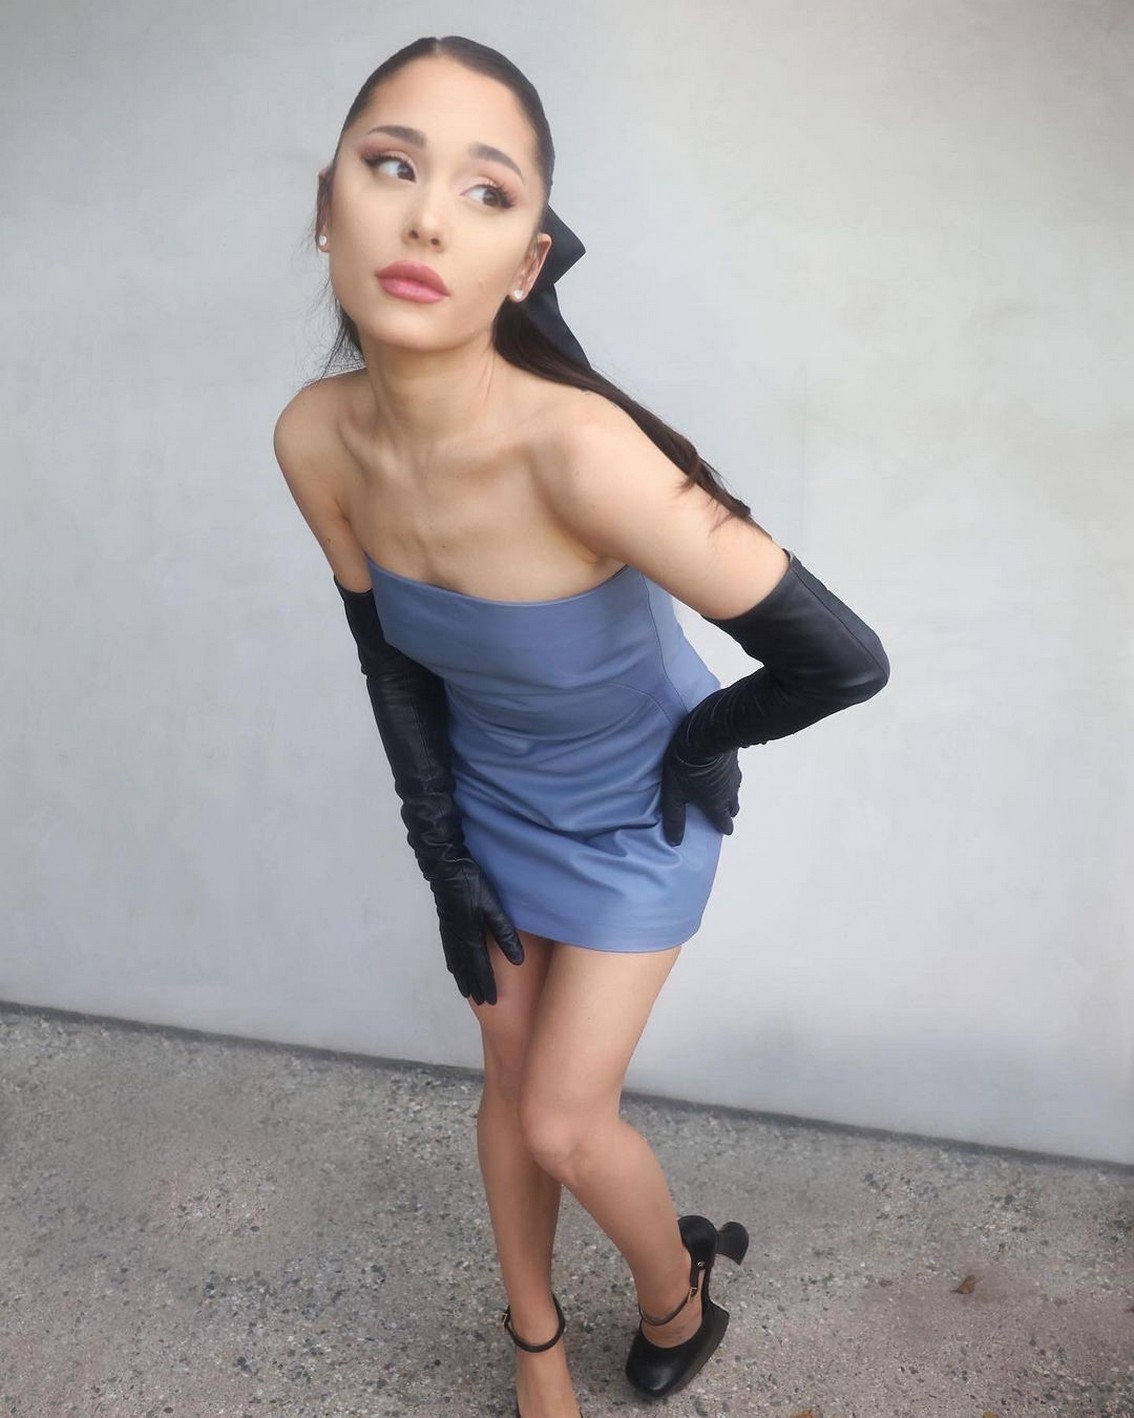 Ariana Grande Hot In Little Dress TheFappening.Pro 2 - Ariana Grande Hot In Little Dress (4 Photos)